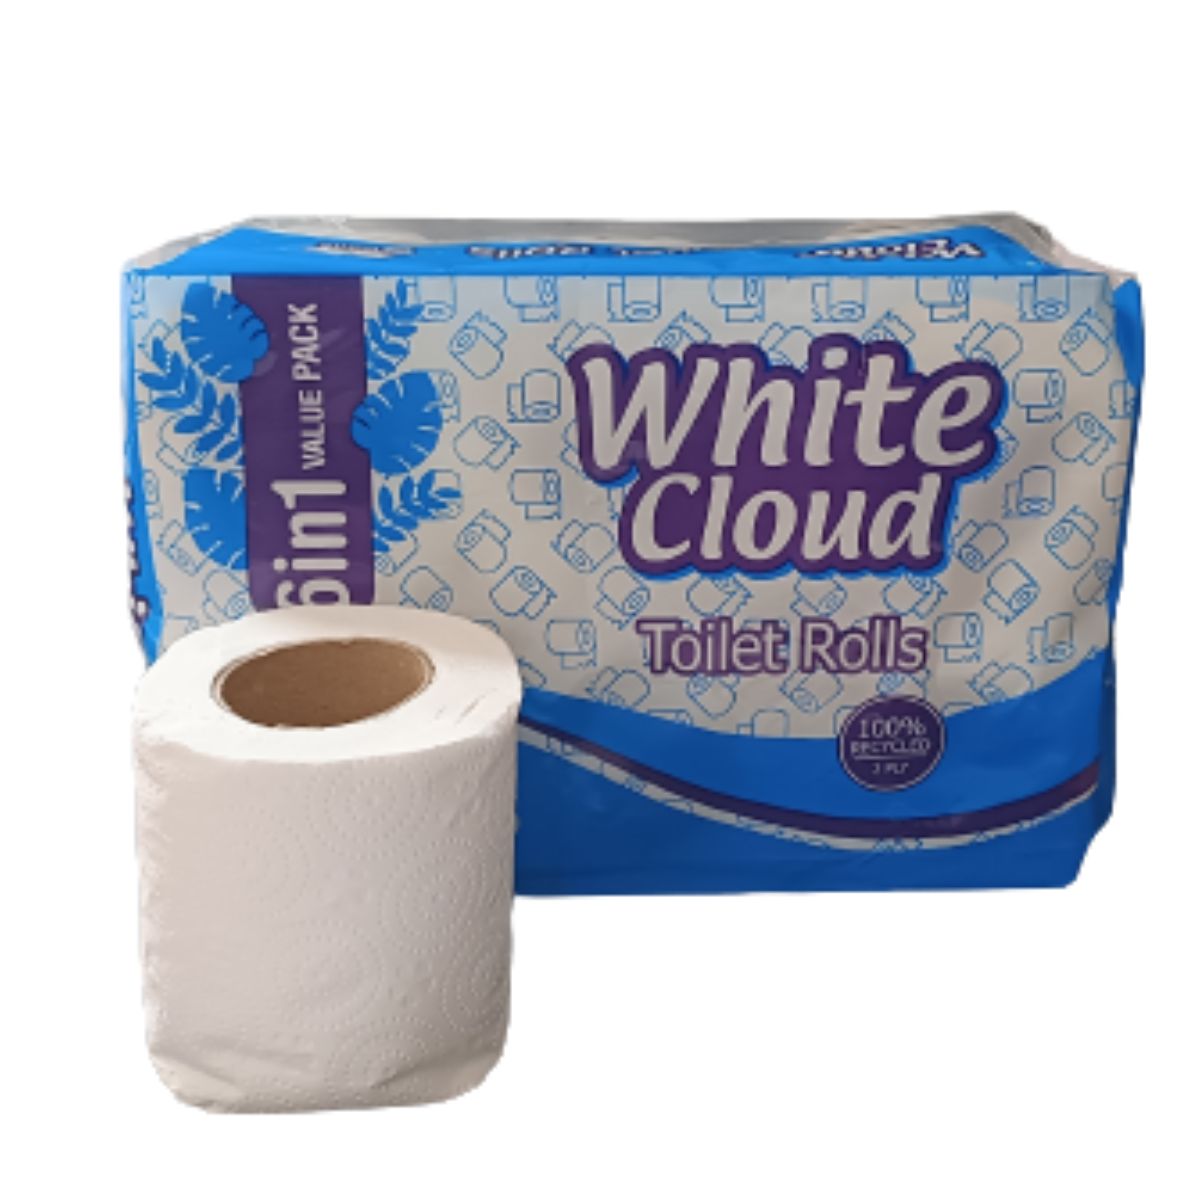 White Cloud Tissue Paper - 6-In-1 Value Pack